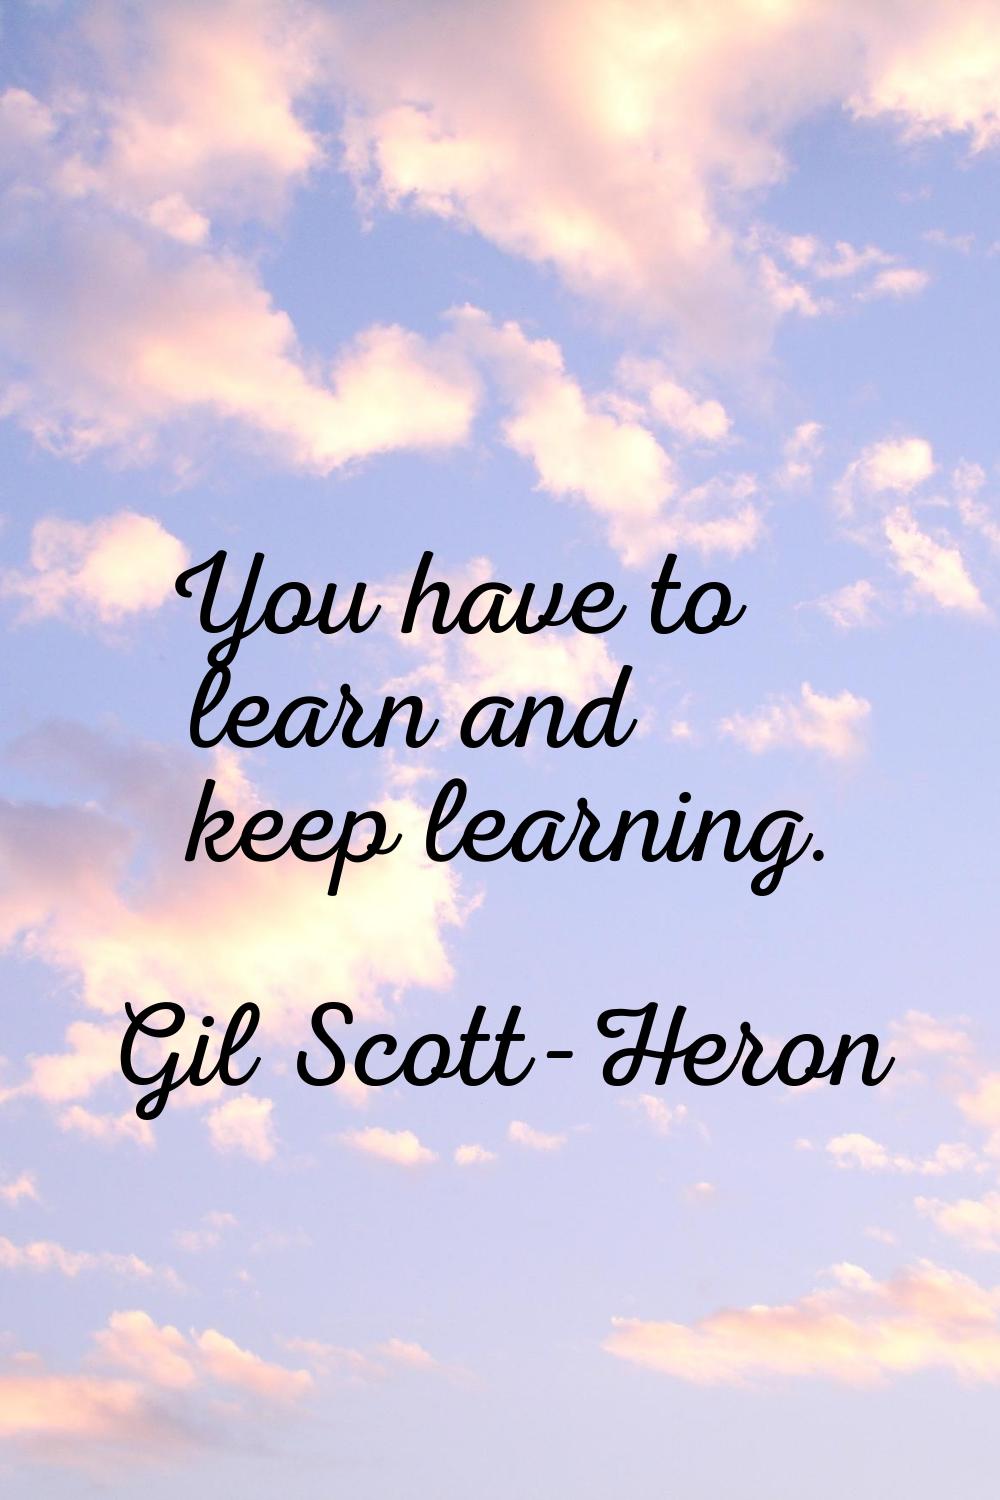 You have to learn and keep learning.